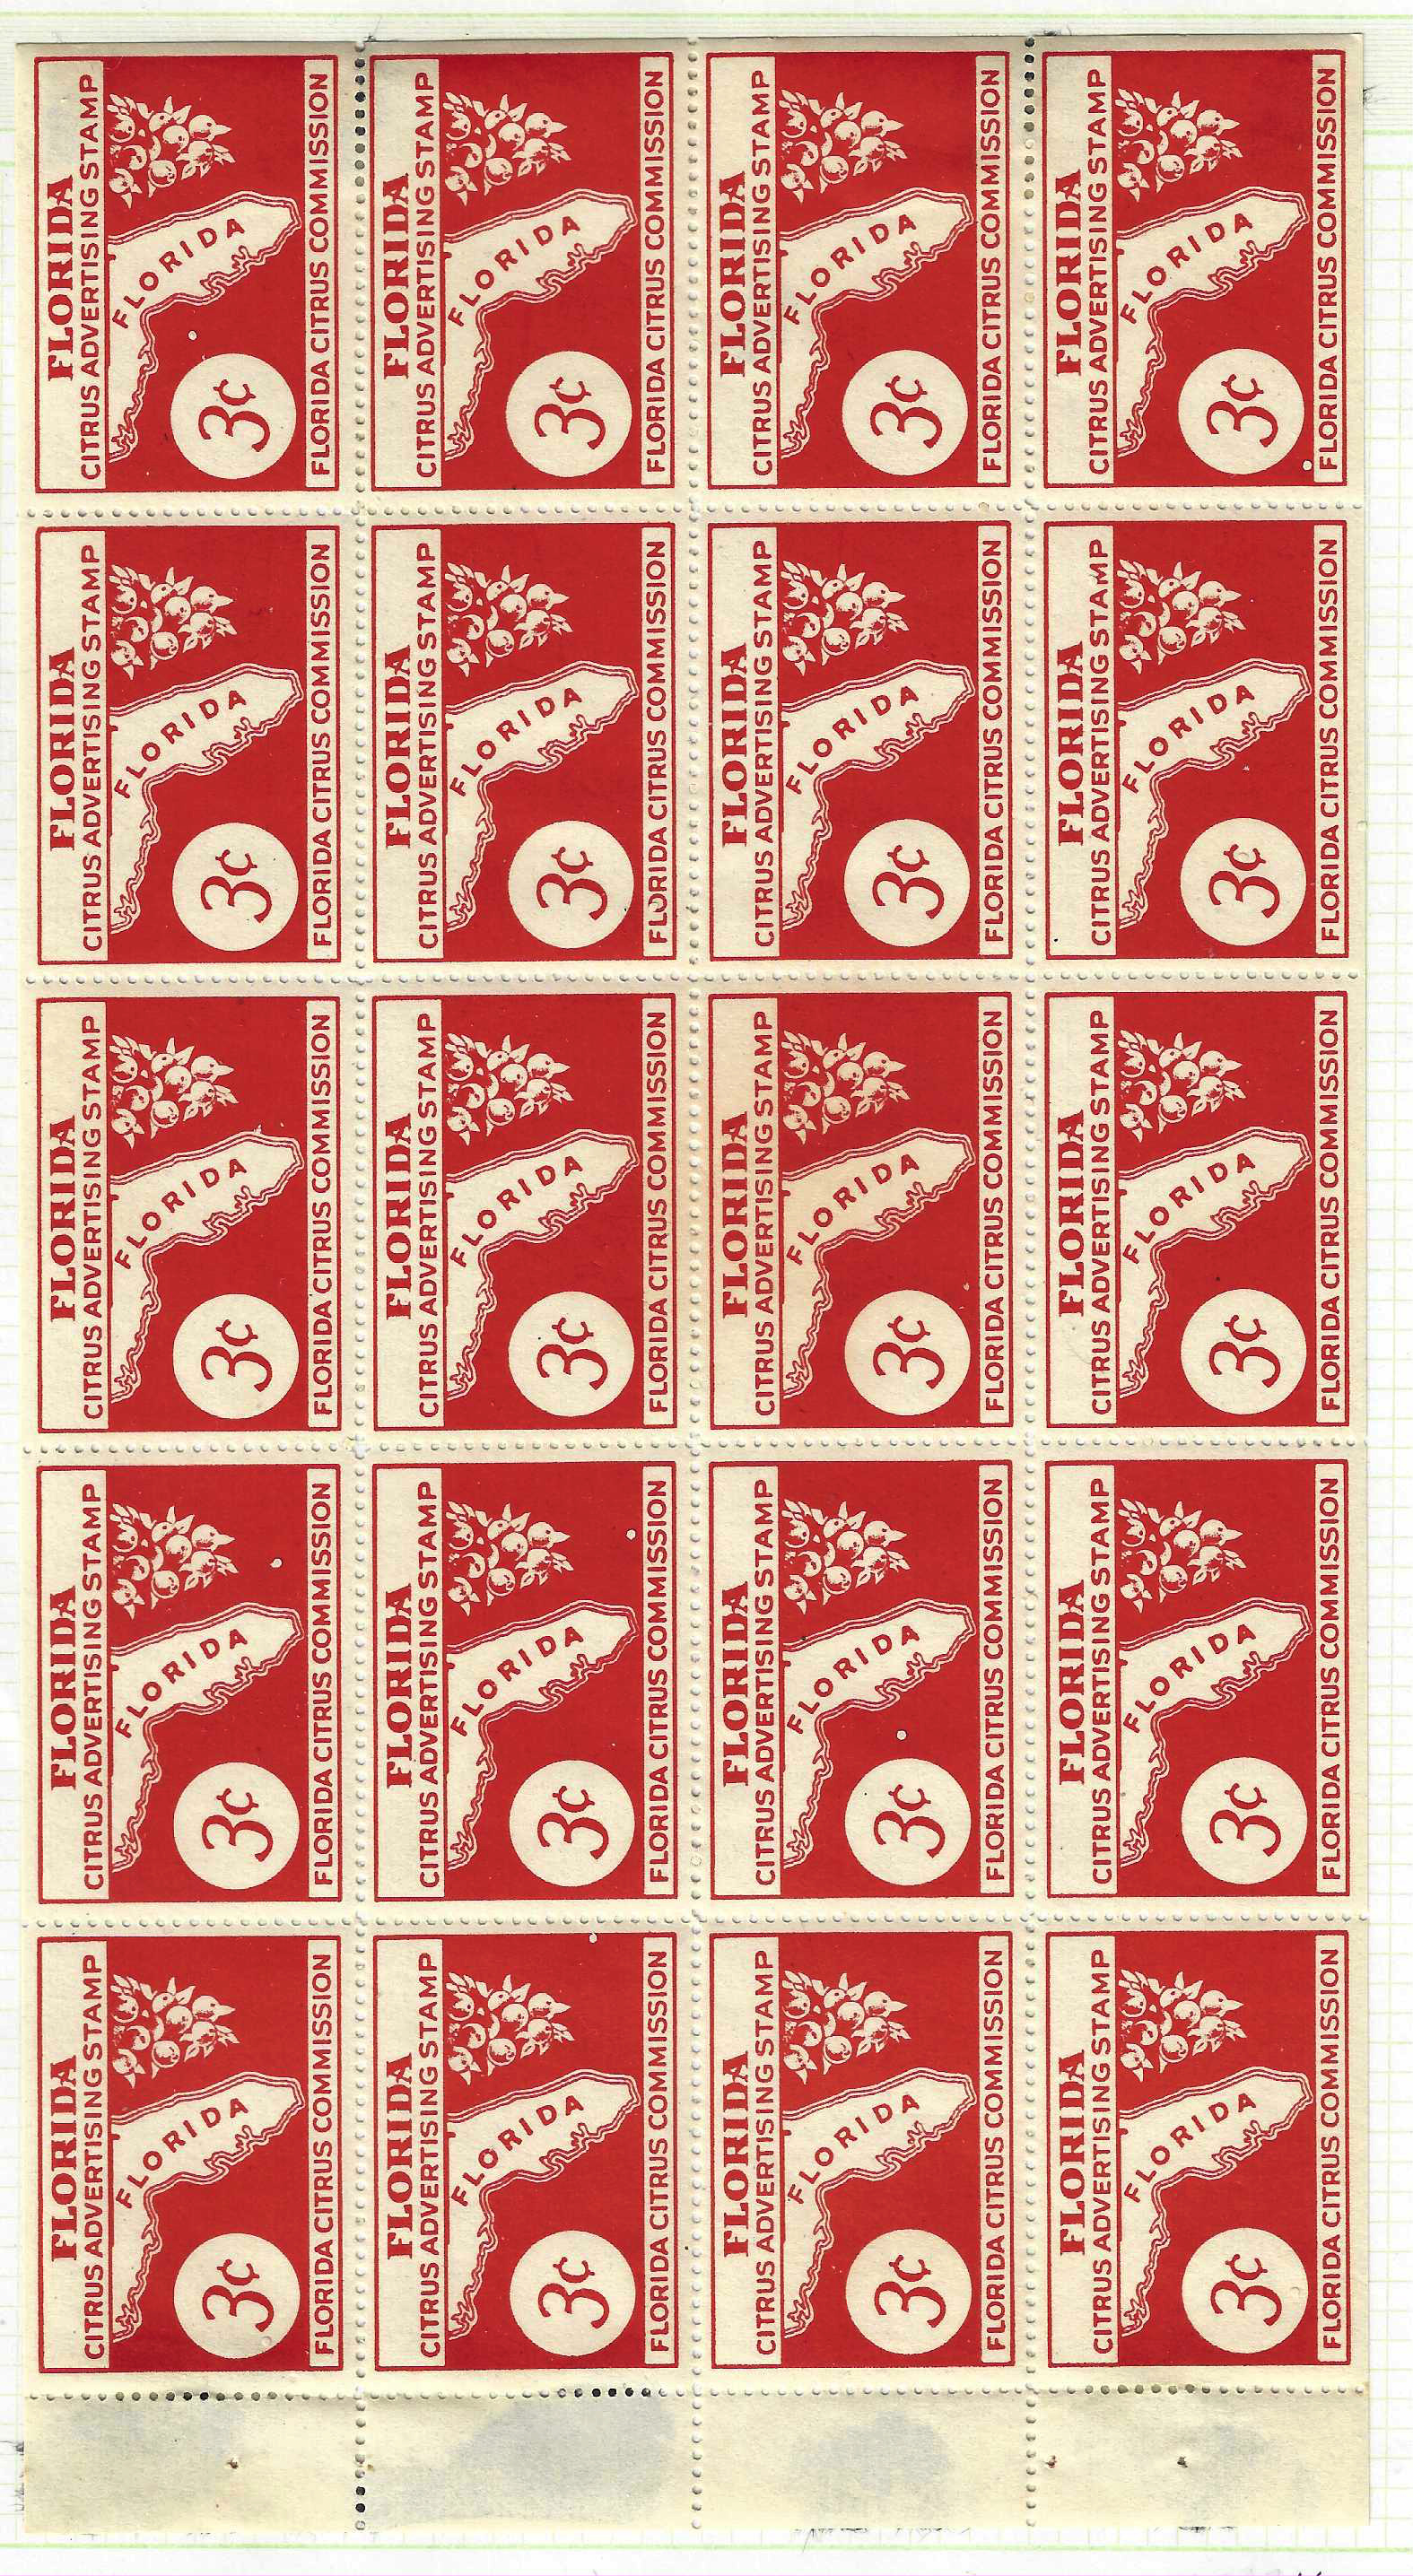 Fl citrus advertizing CFA16 red 3¢ sheet/24 hinged to album page MH VF 